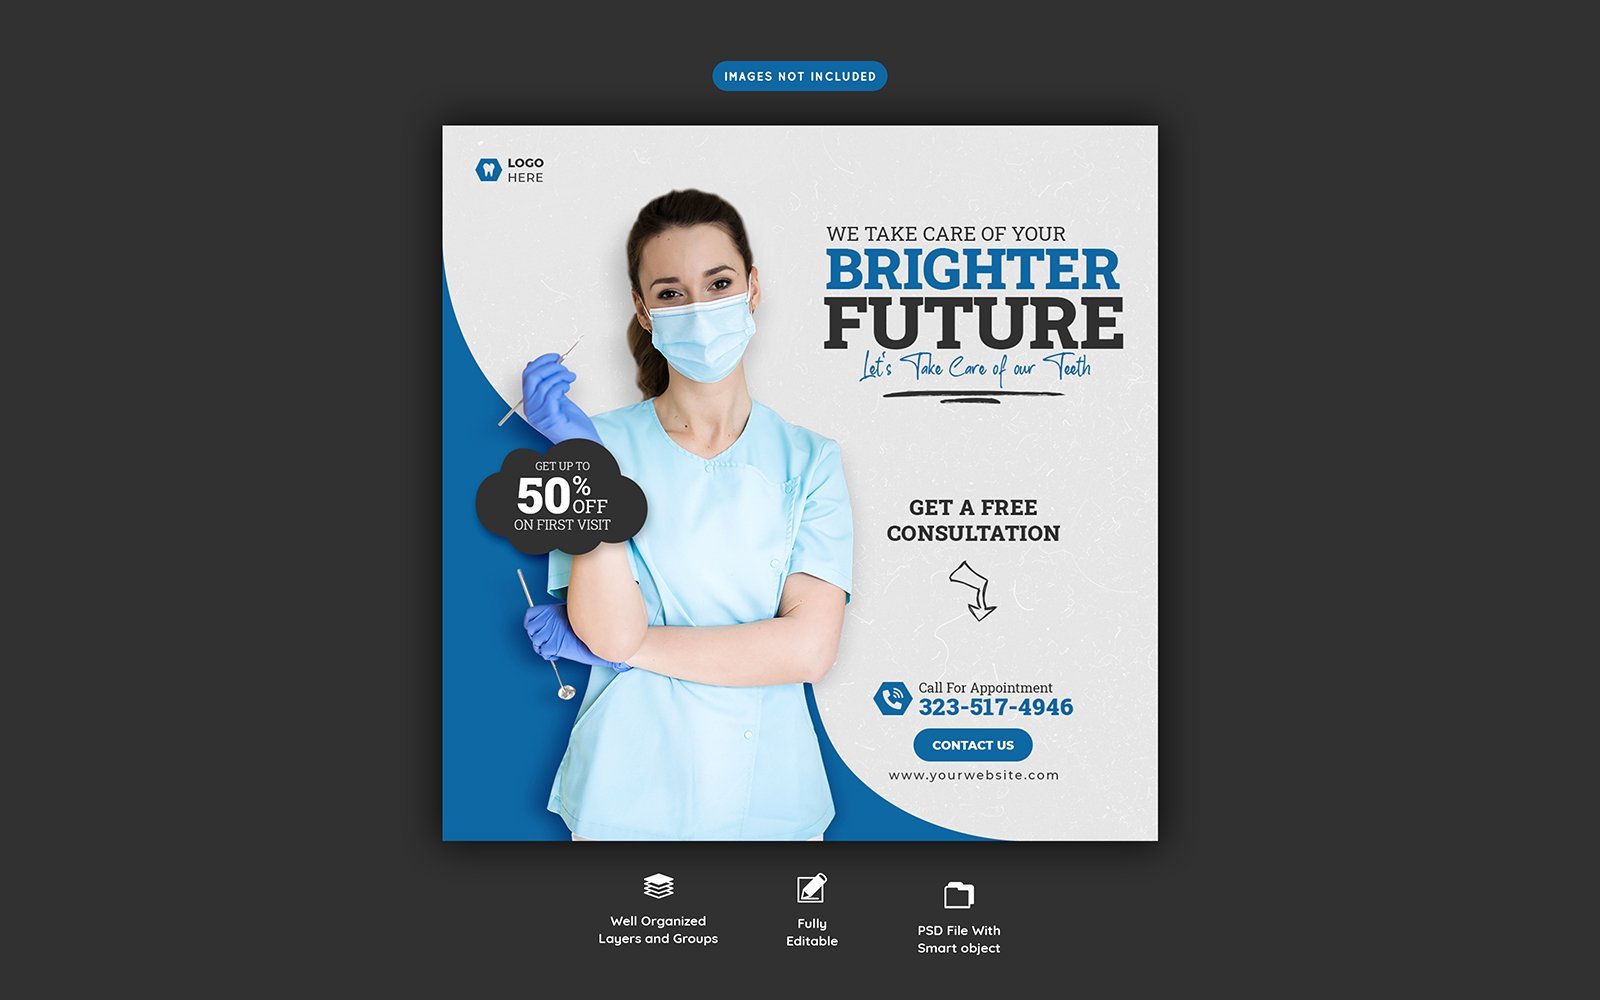 Template #325832 Health Instagram Webdesign Template - Logo template Preview